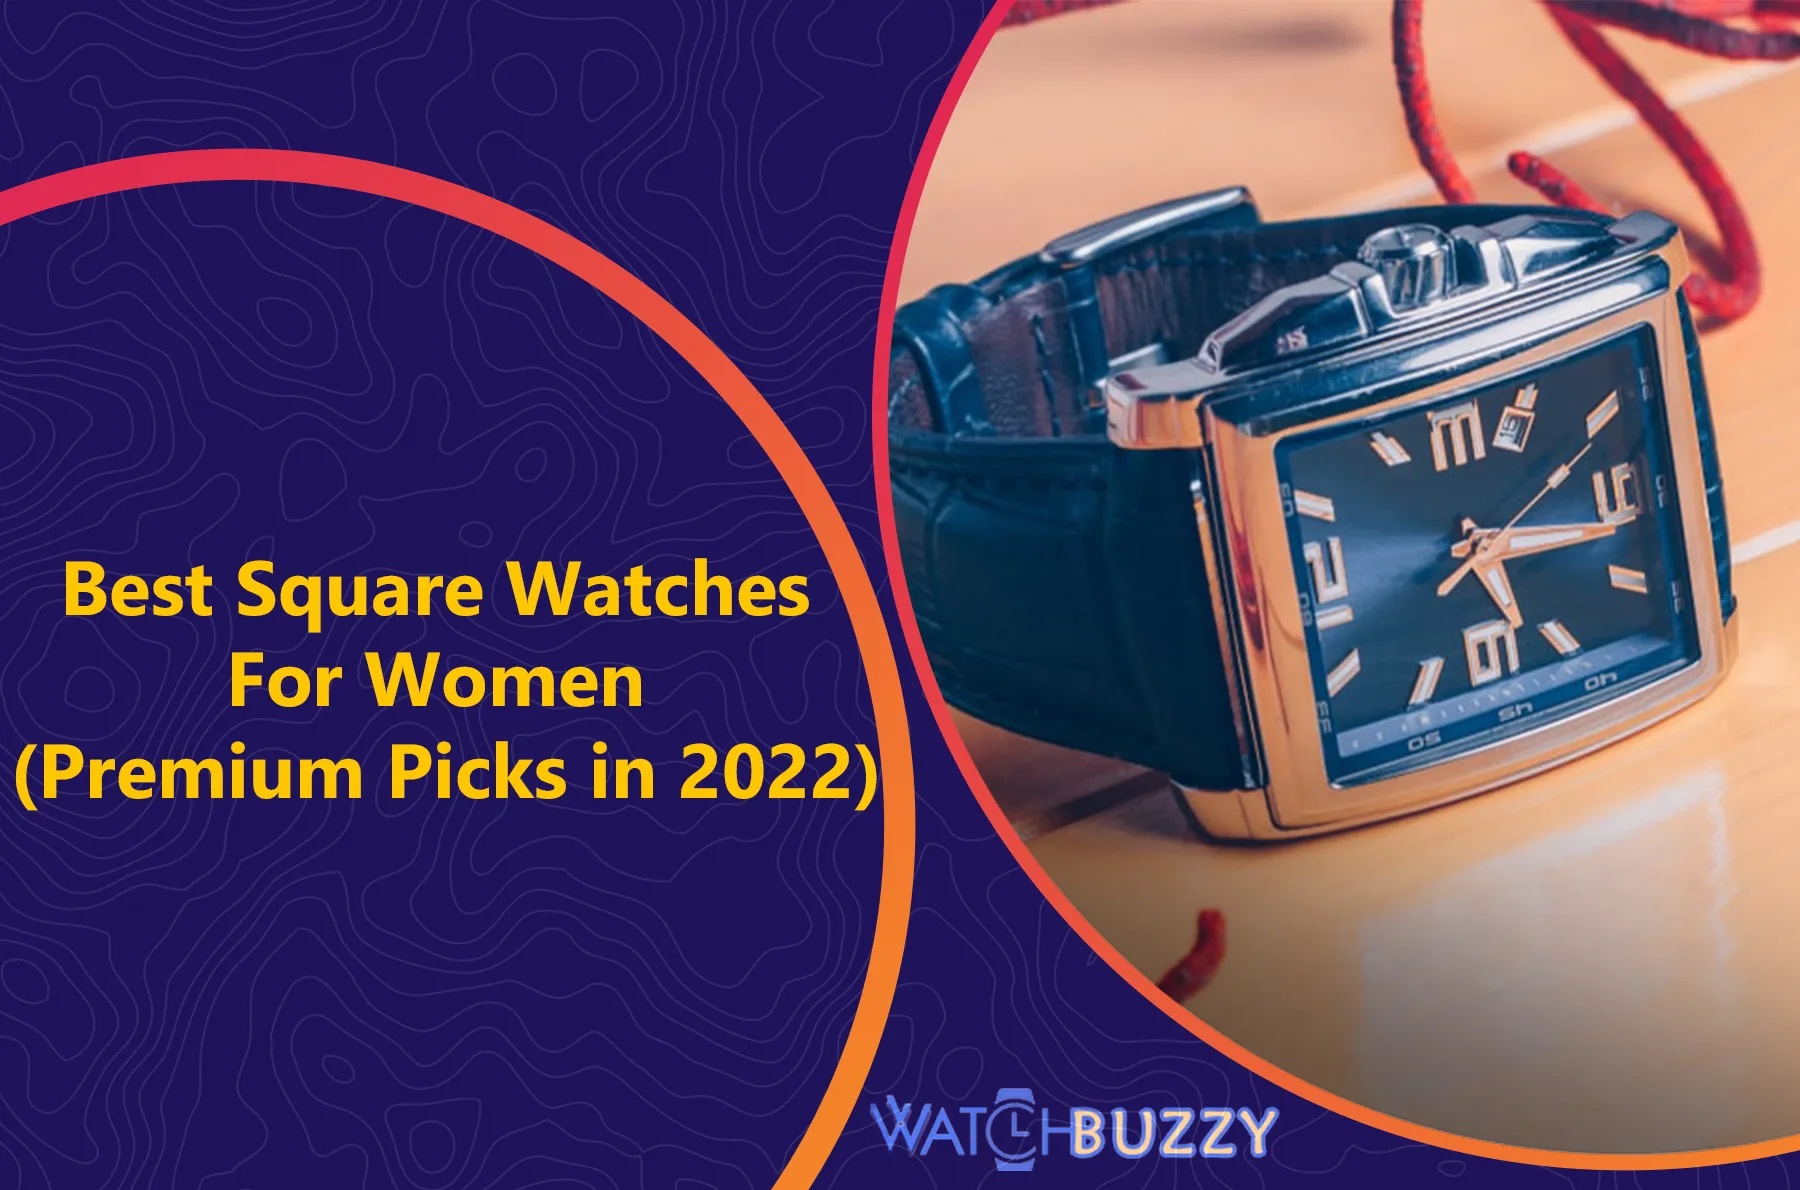 Best Square Watches For Women (Premium Picks in 2022)